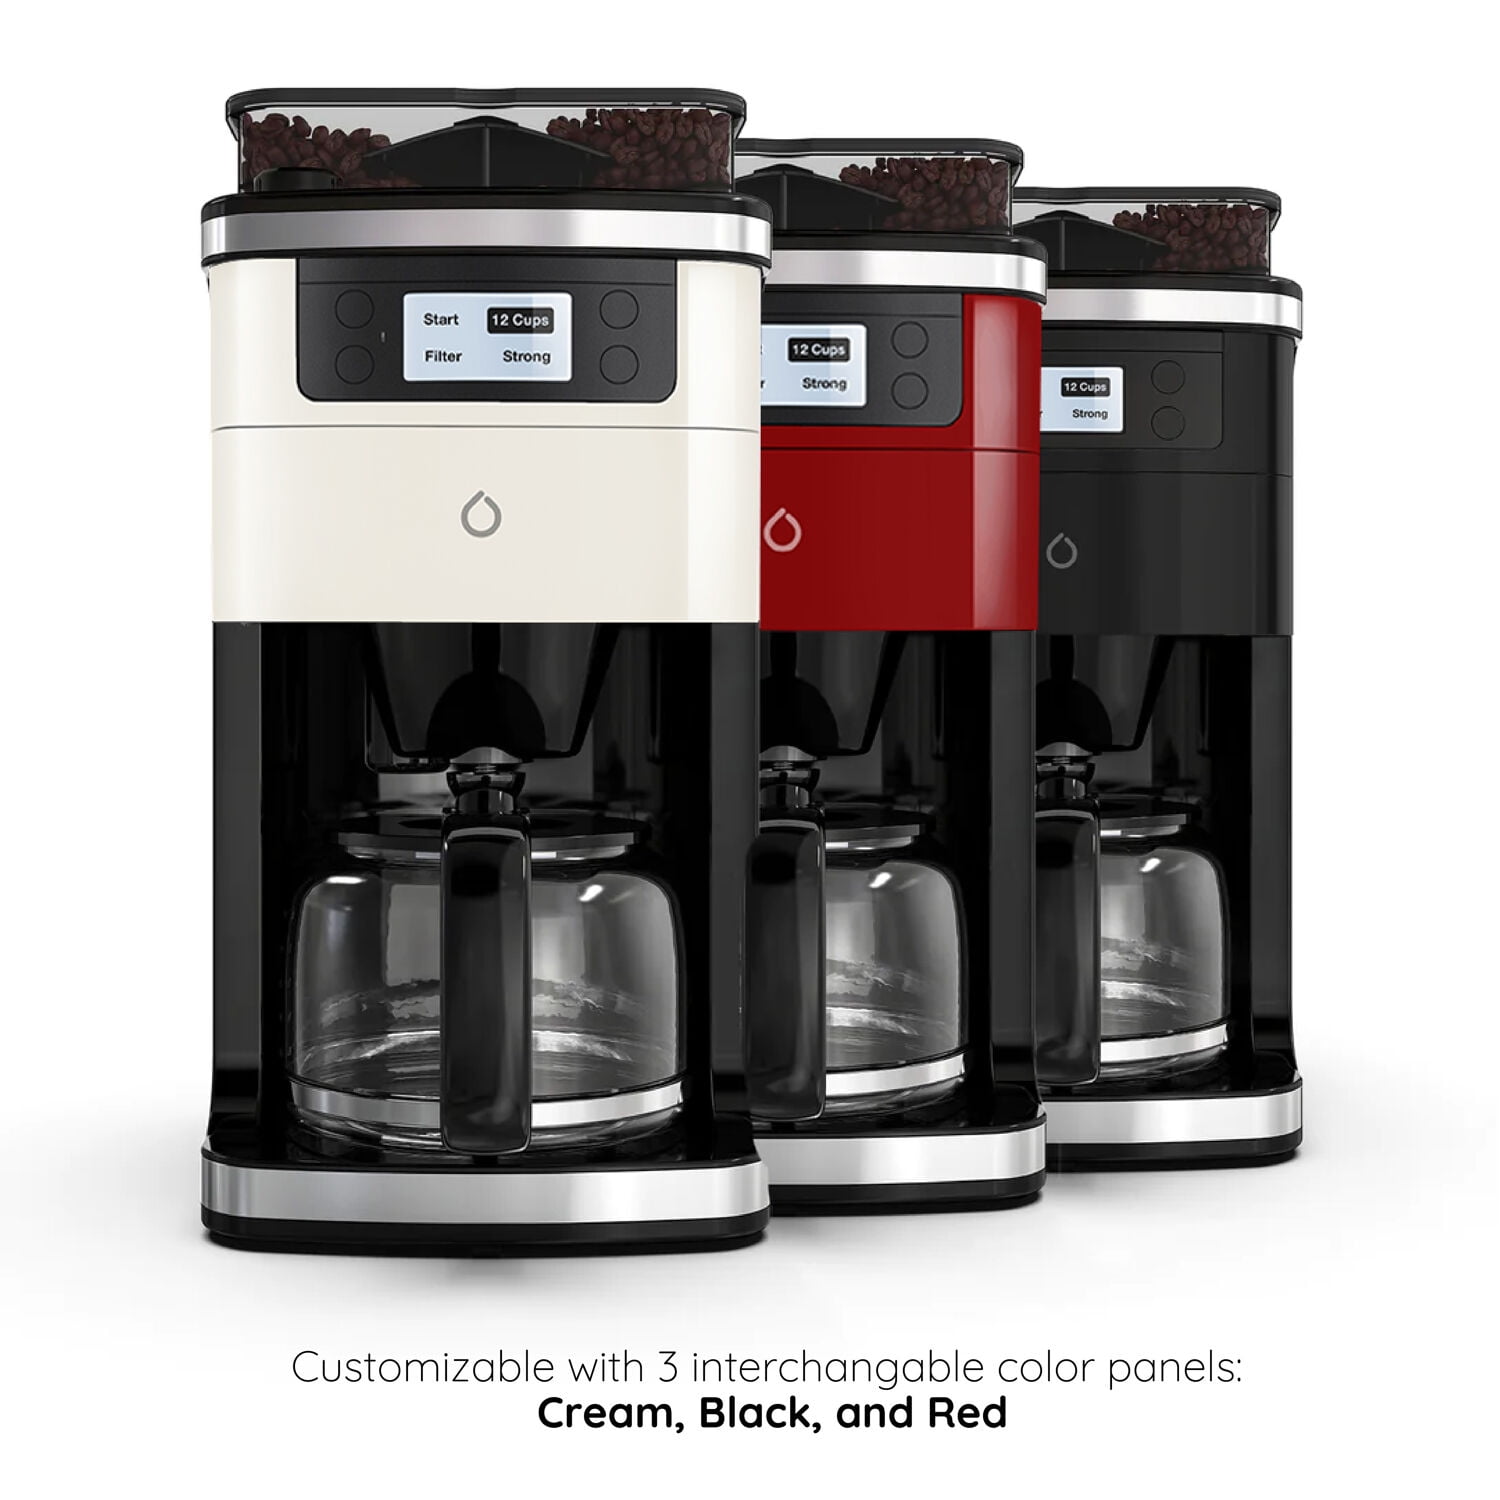 Smarter iCoffee Brew Smart Coffee Maker and Grinder with App, 3 Panels  (Cream, Black, Red, New)